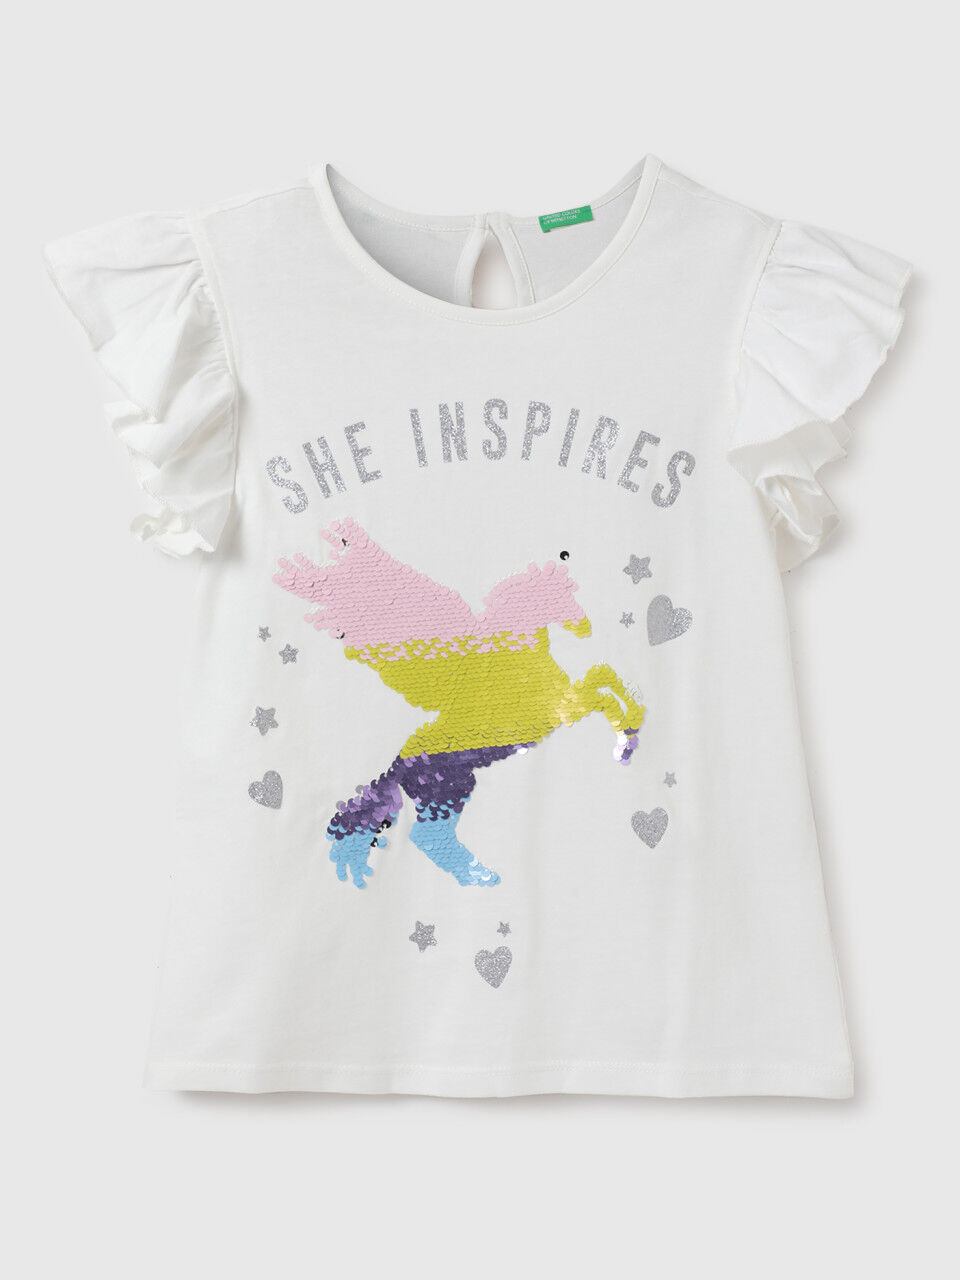 United Colors Of Benetton Girls Printed Round Neck T-Shirt